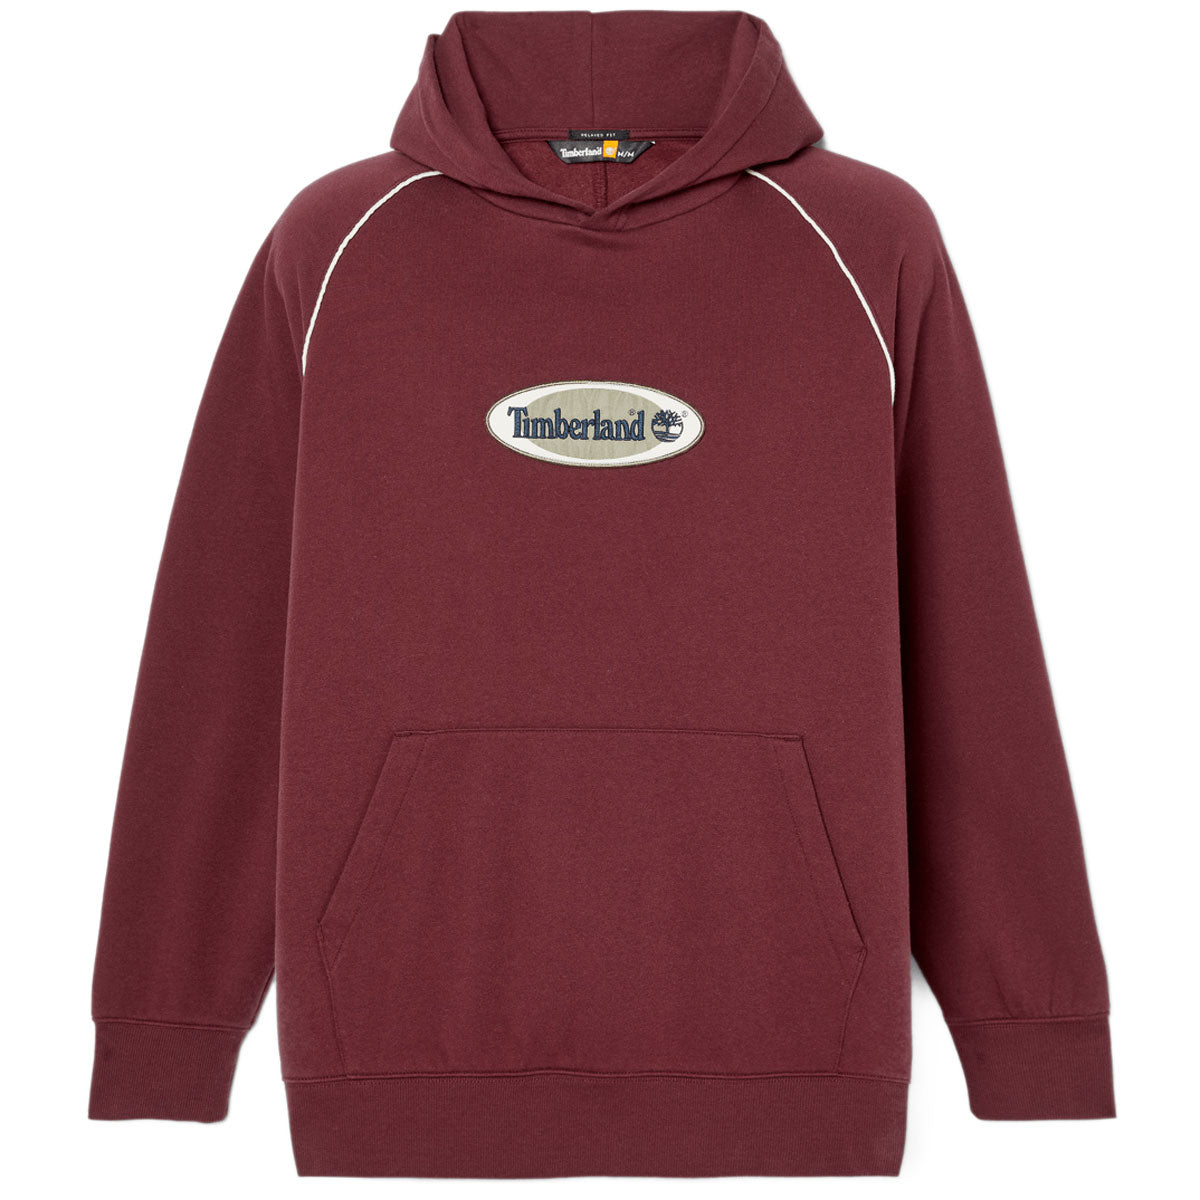 Timberland Oval Logo Patch Hoodie - Port Royale image 4